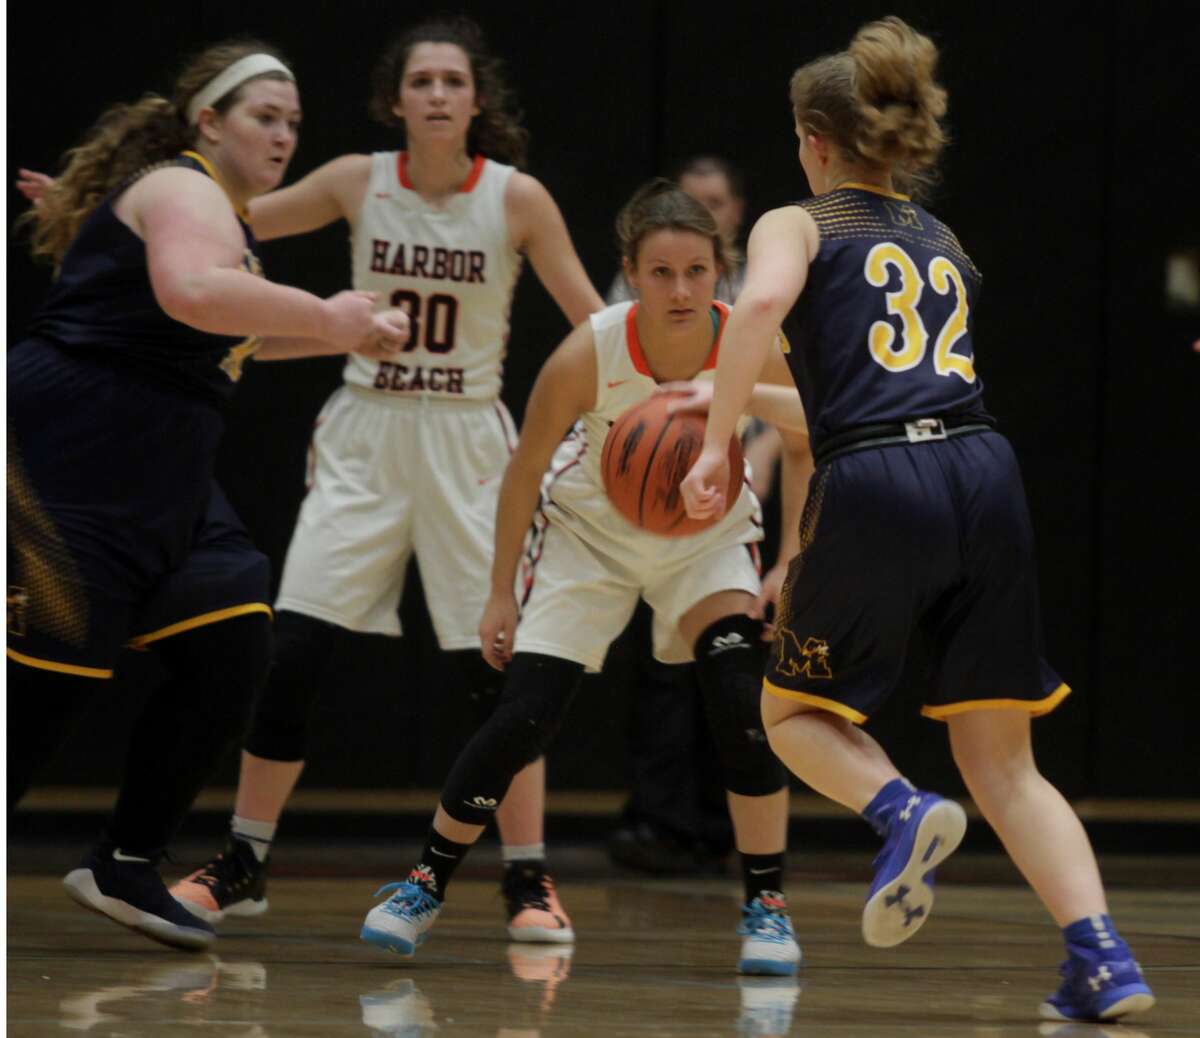 The Harbor Beach girls basketball team recorded a 68-17 win over Memphis at home on Tuesday, Feb. 25.